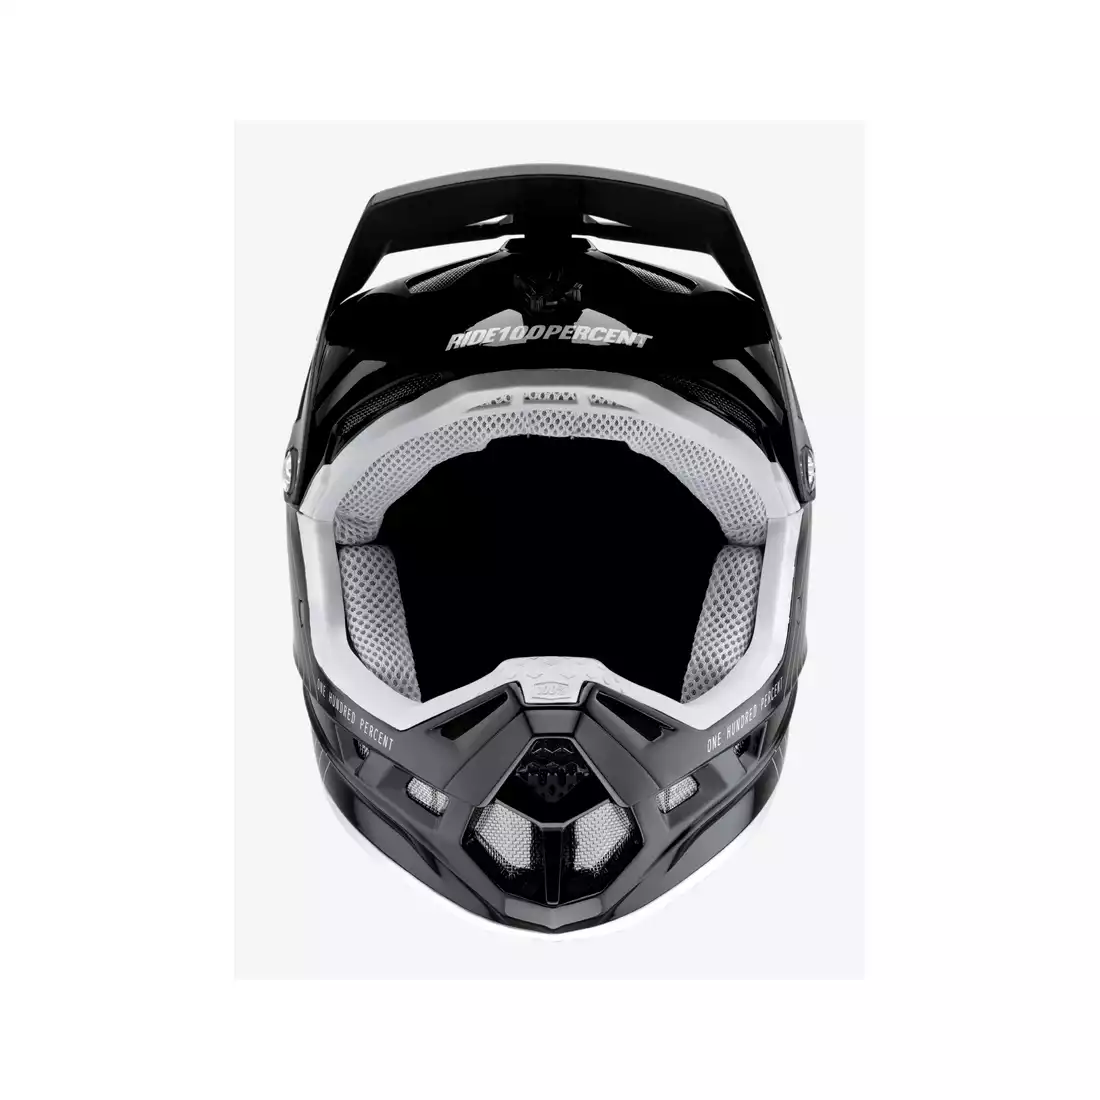 100% kask rowerowy full face AIRCRAFT COMPOSITE silo STO-80004-368-09